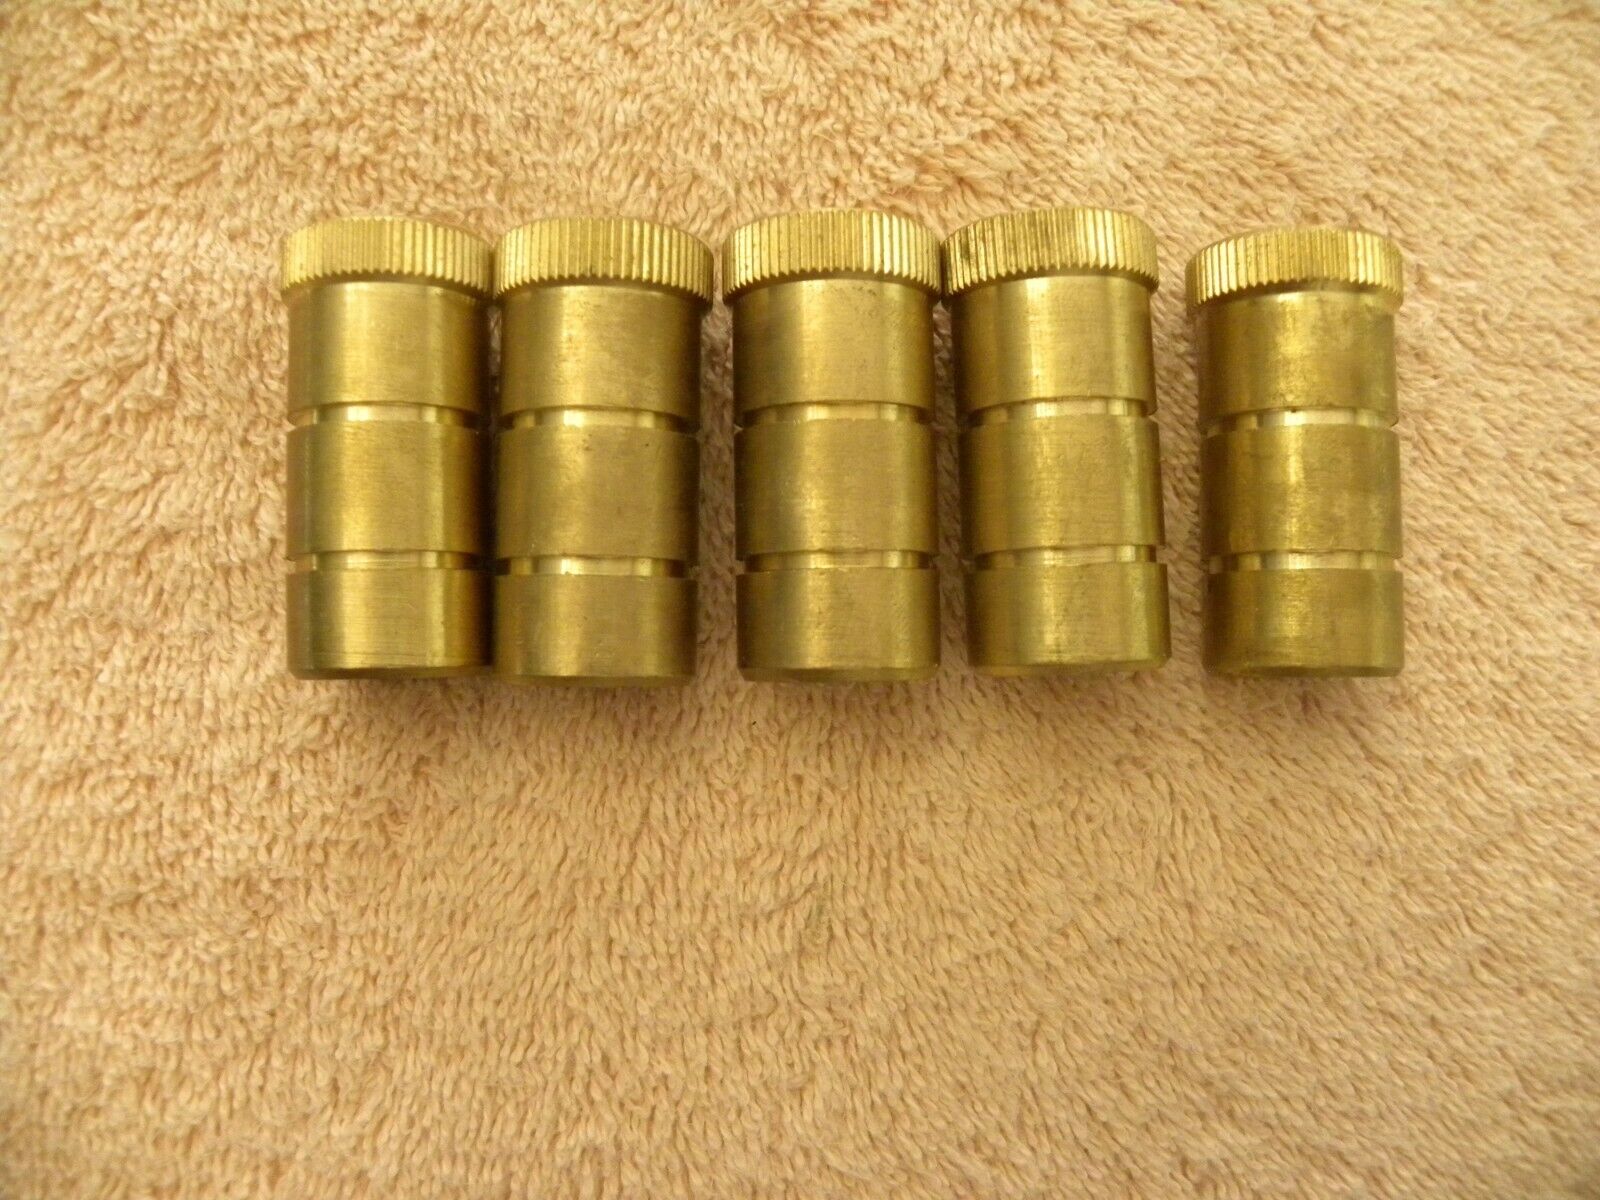 Brass Anchor Pool Safety Cover Debris Clean Hole Replacement Parts Tools 5 Pack